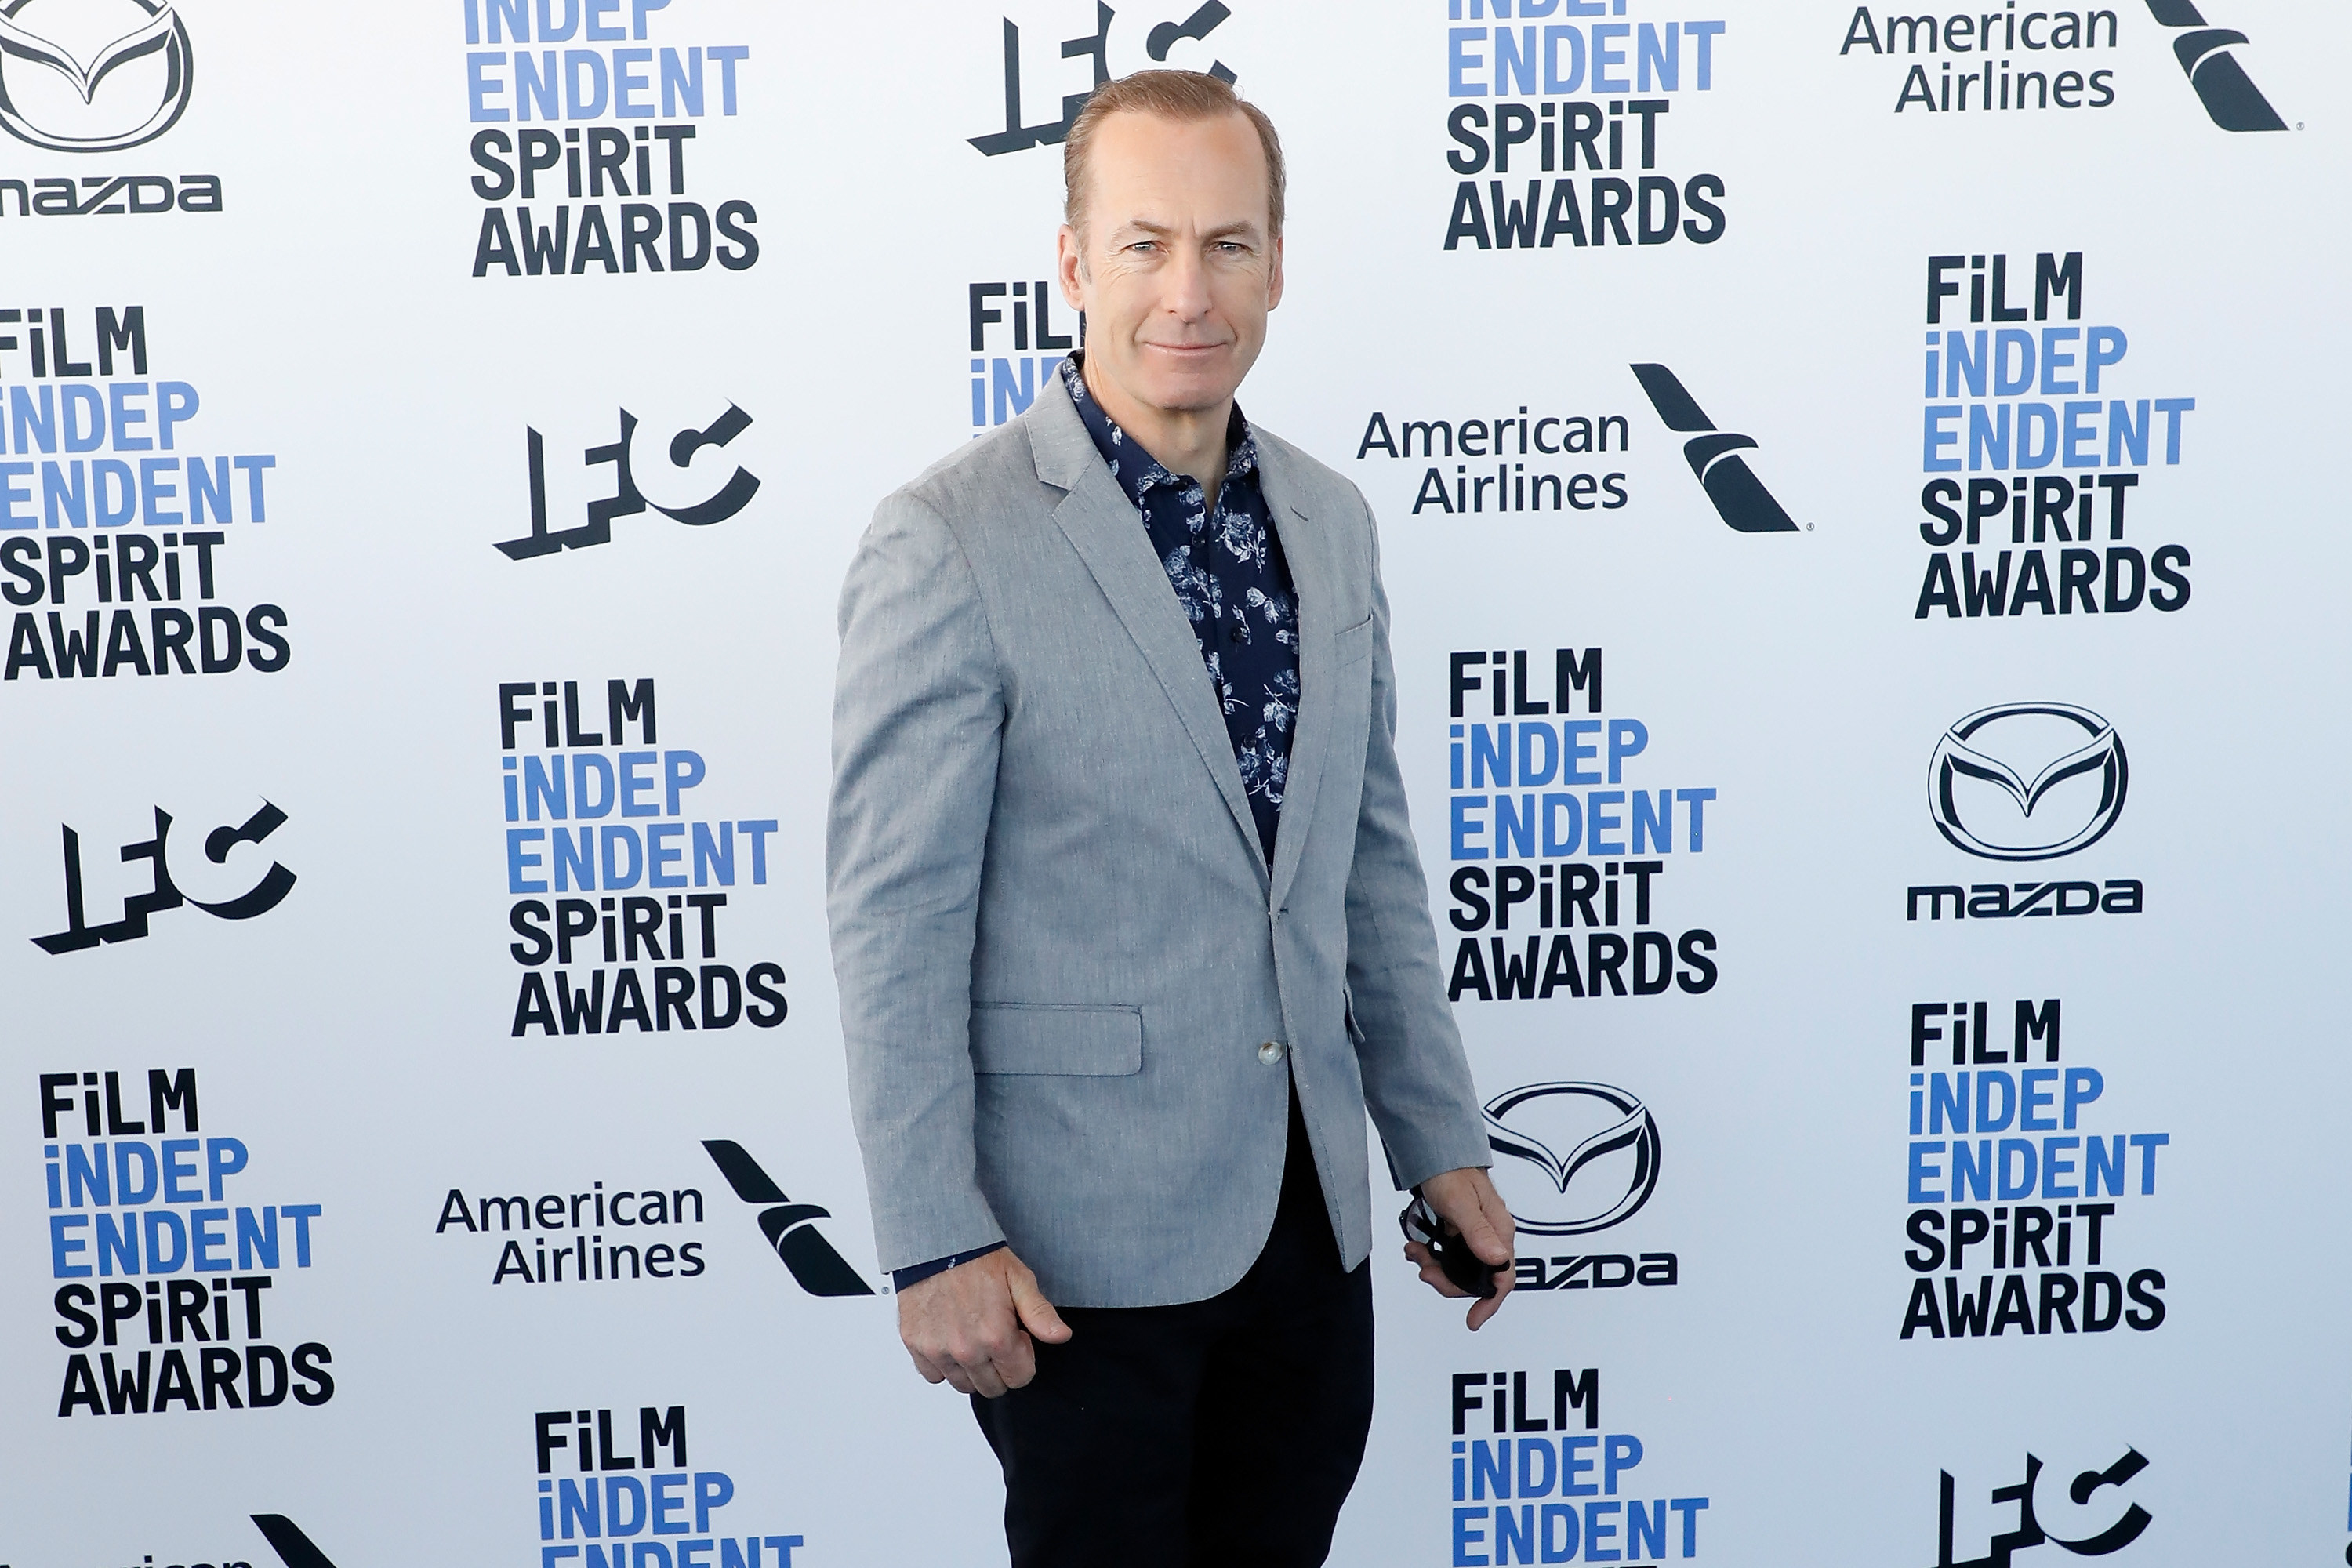 Odenkirk poses for a photo at a step-and-repeat